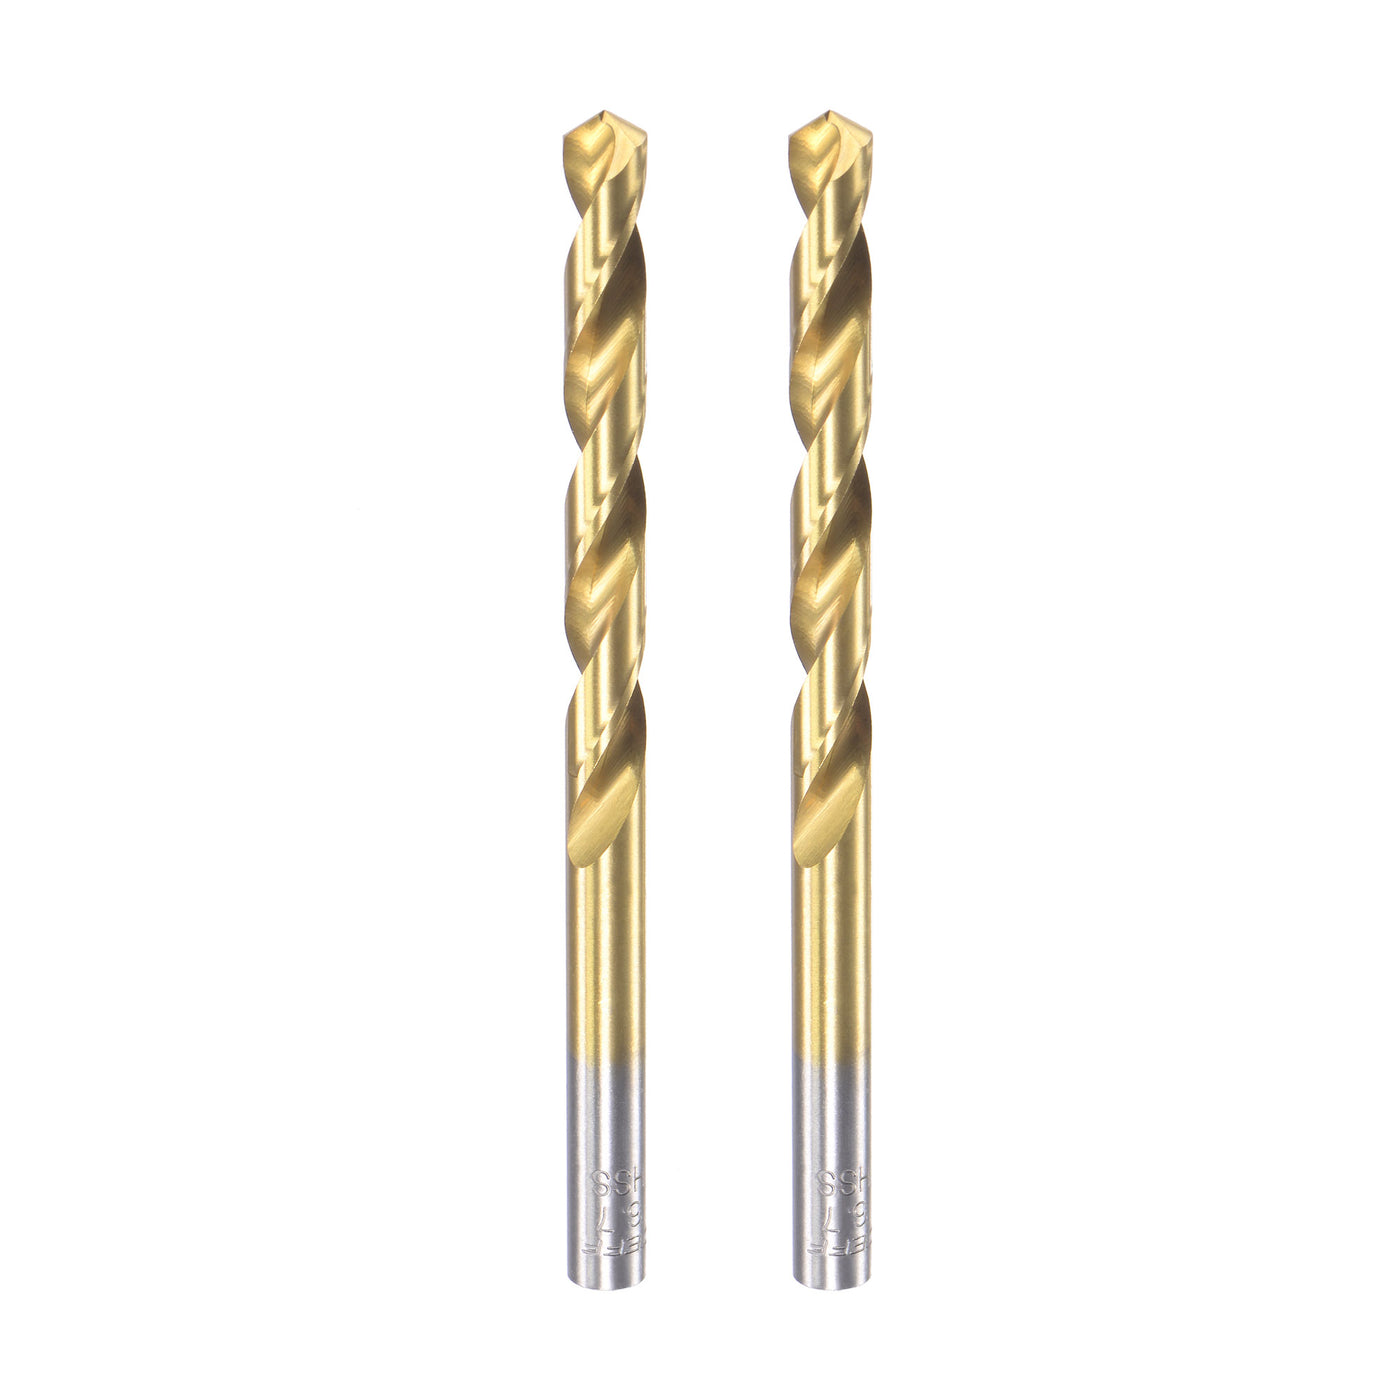 uxcell Uxcell High Speed Steel Twist Drill Bit 6.7mm Fully Ground Titanium Coated 2 Pcs